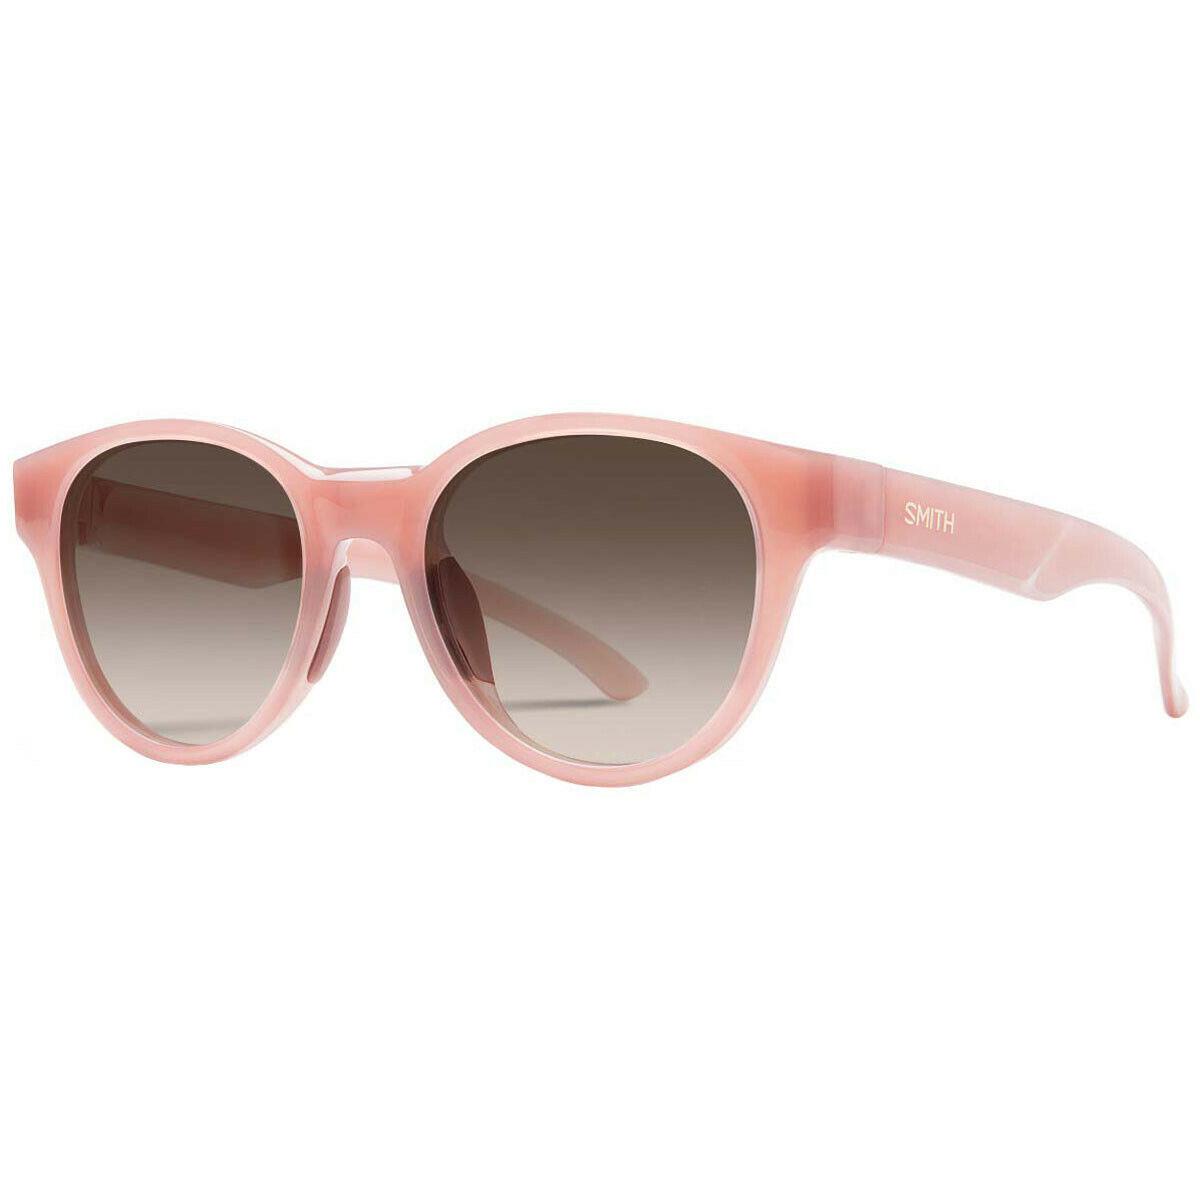 Smith Snare F45 HA 51mm Pink Beige Brown Gradient Rounded Ladies Sunglasses - Frame: Beige Coffee, Lens: Brown